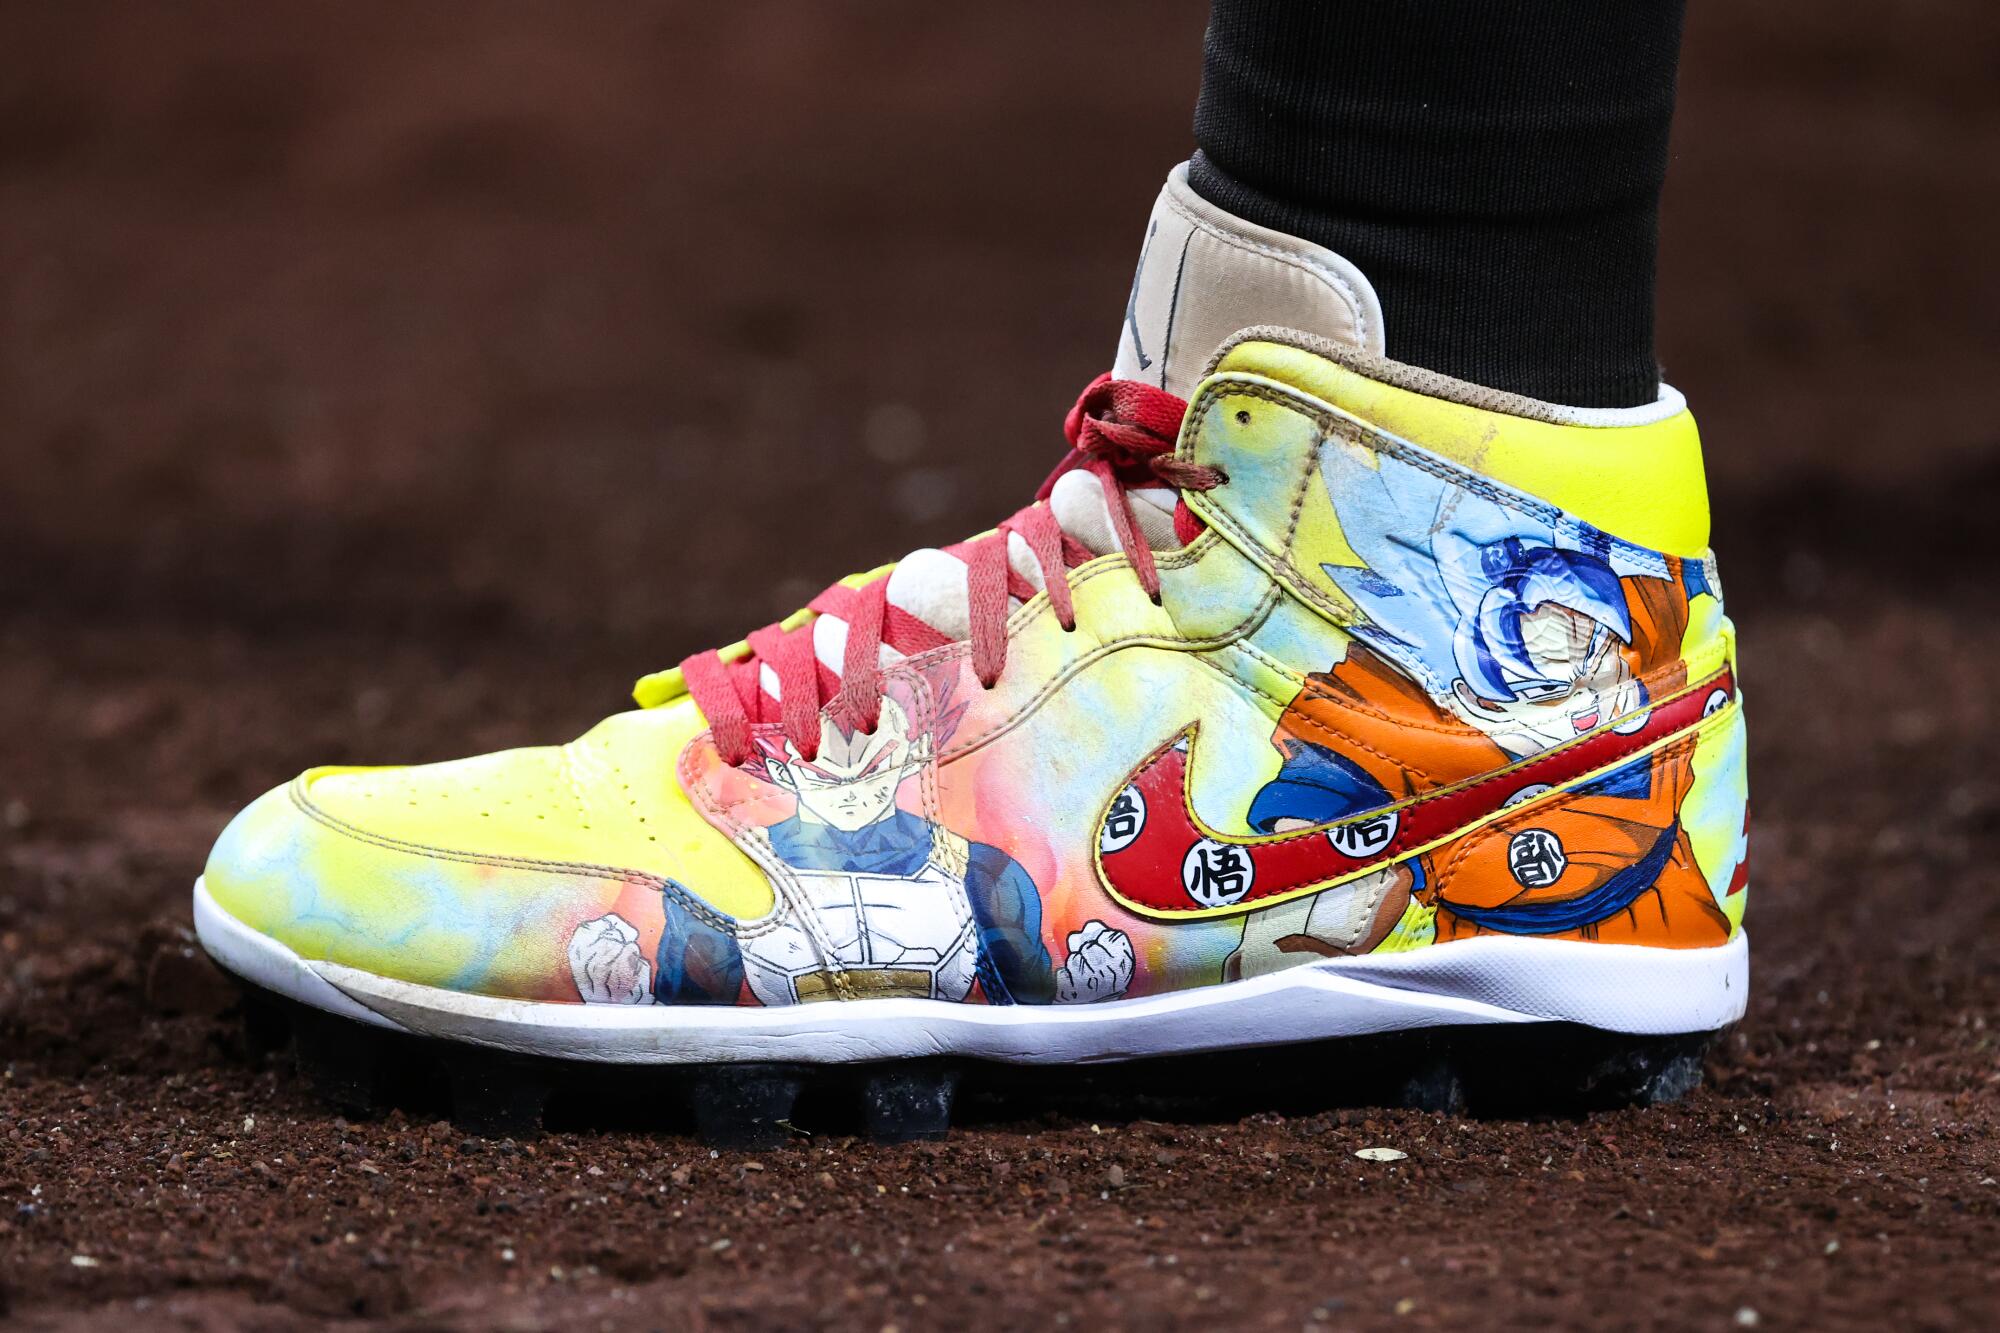 Fernando Tatis Jr. believes his player-exclusive cleats fuse fashion with  performance